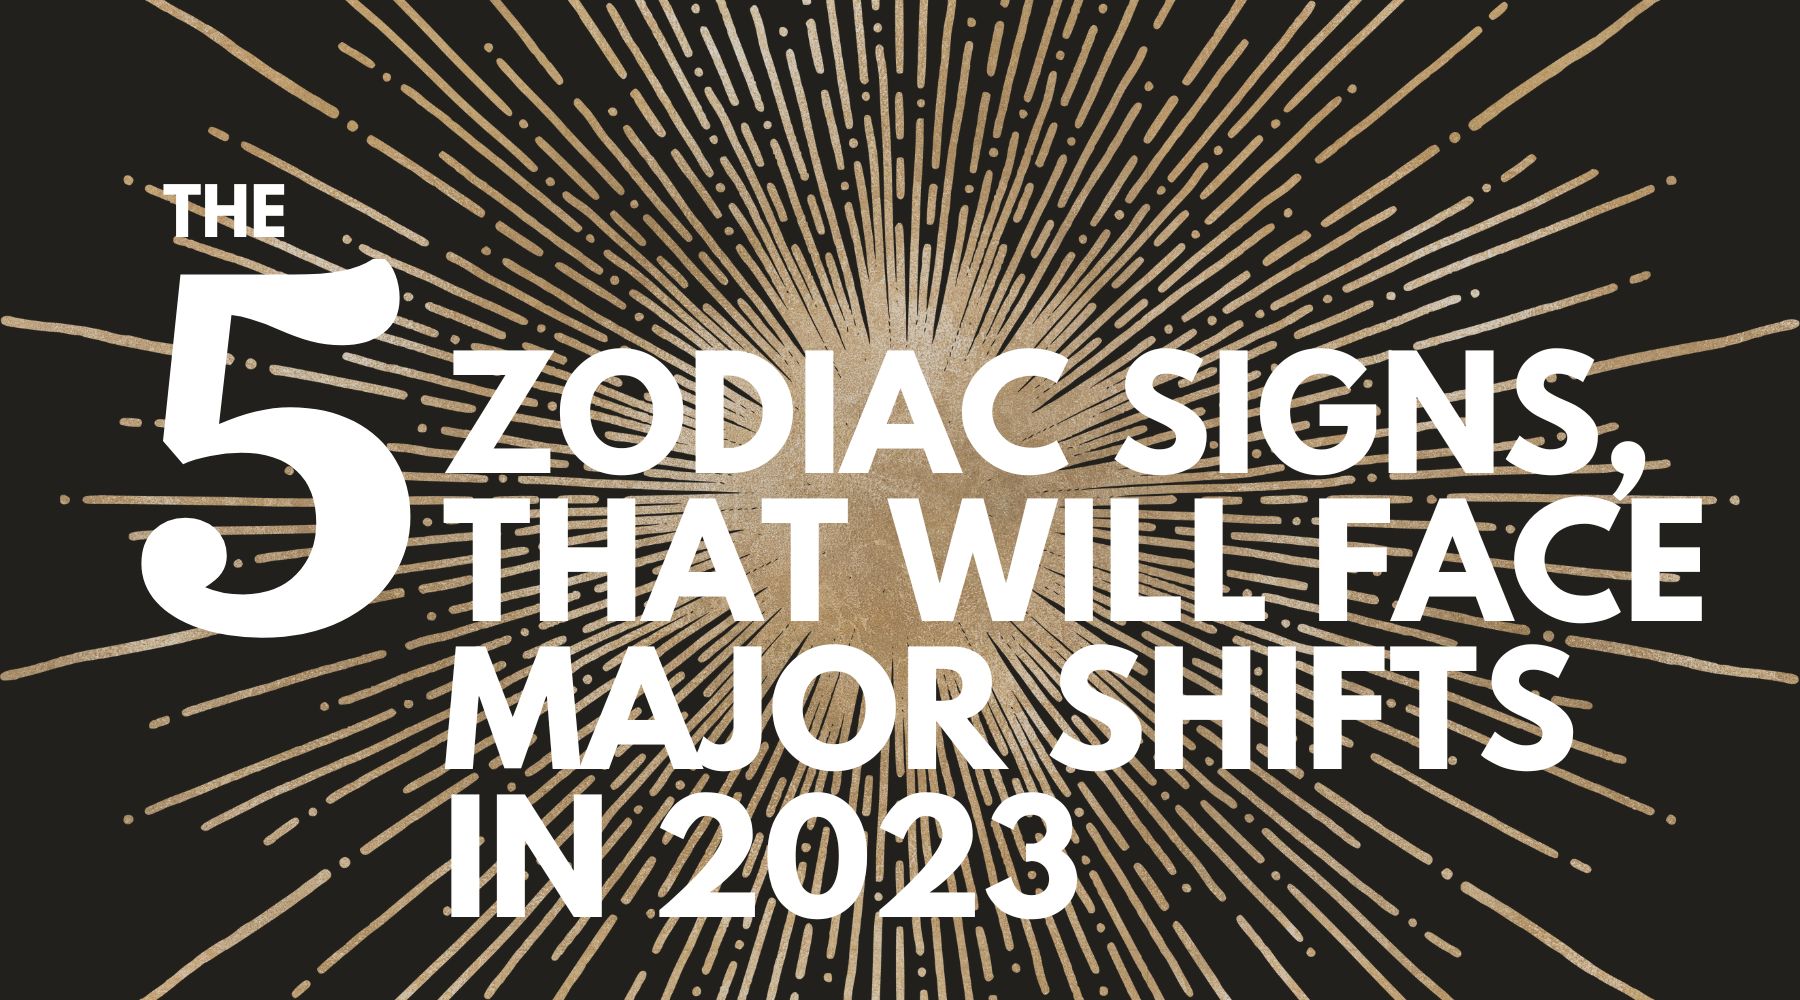 The 5 zodiac signs, that will face major shifts in 2023